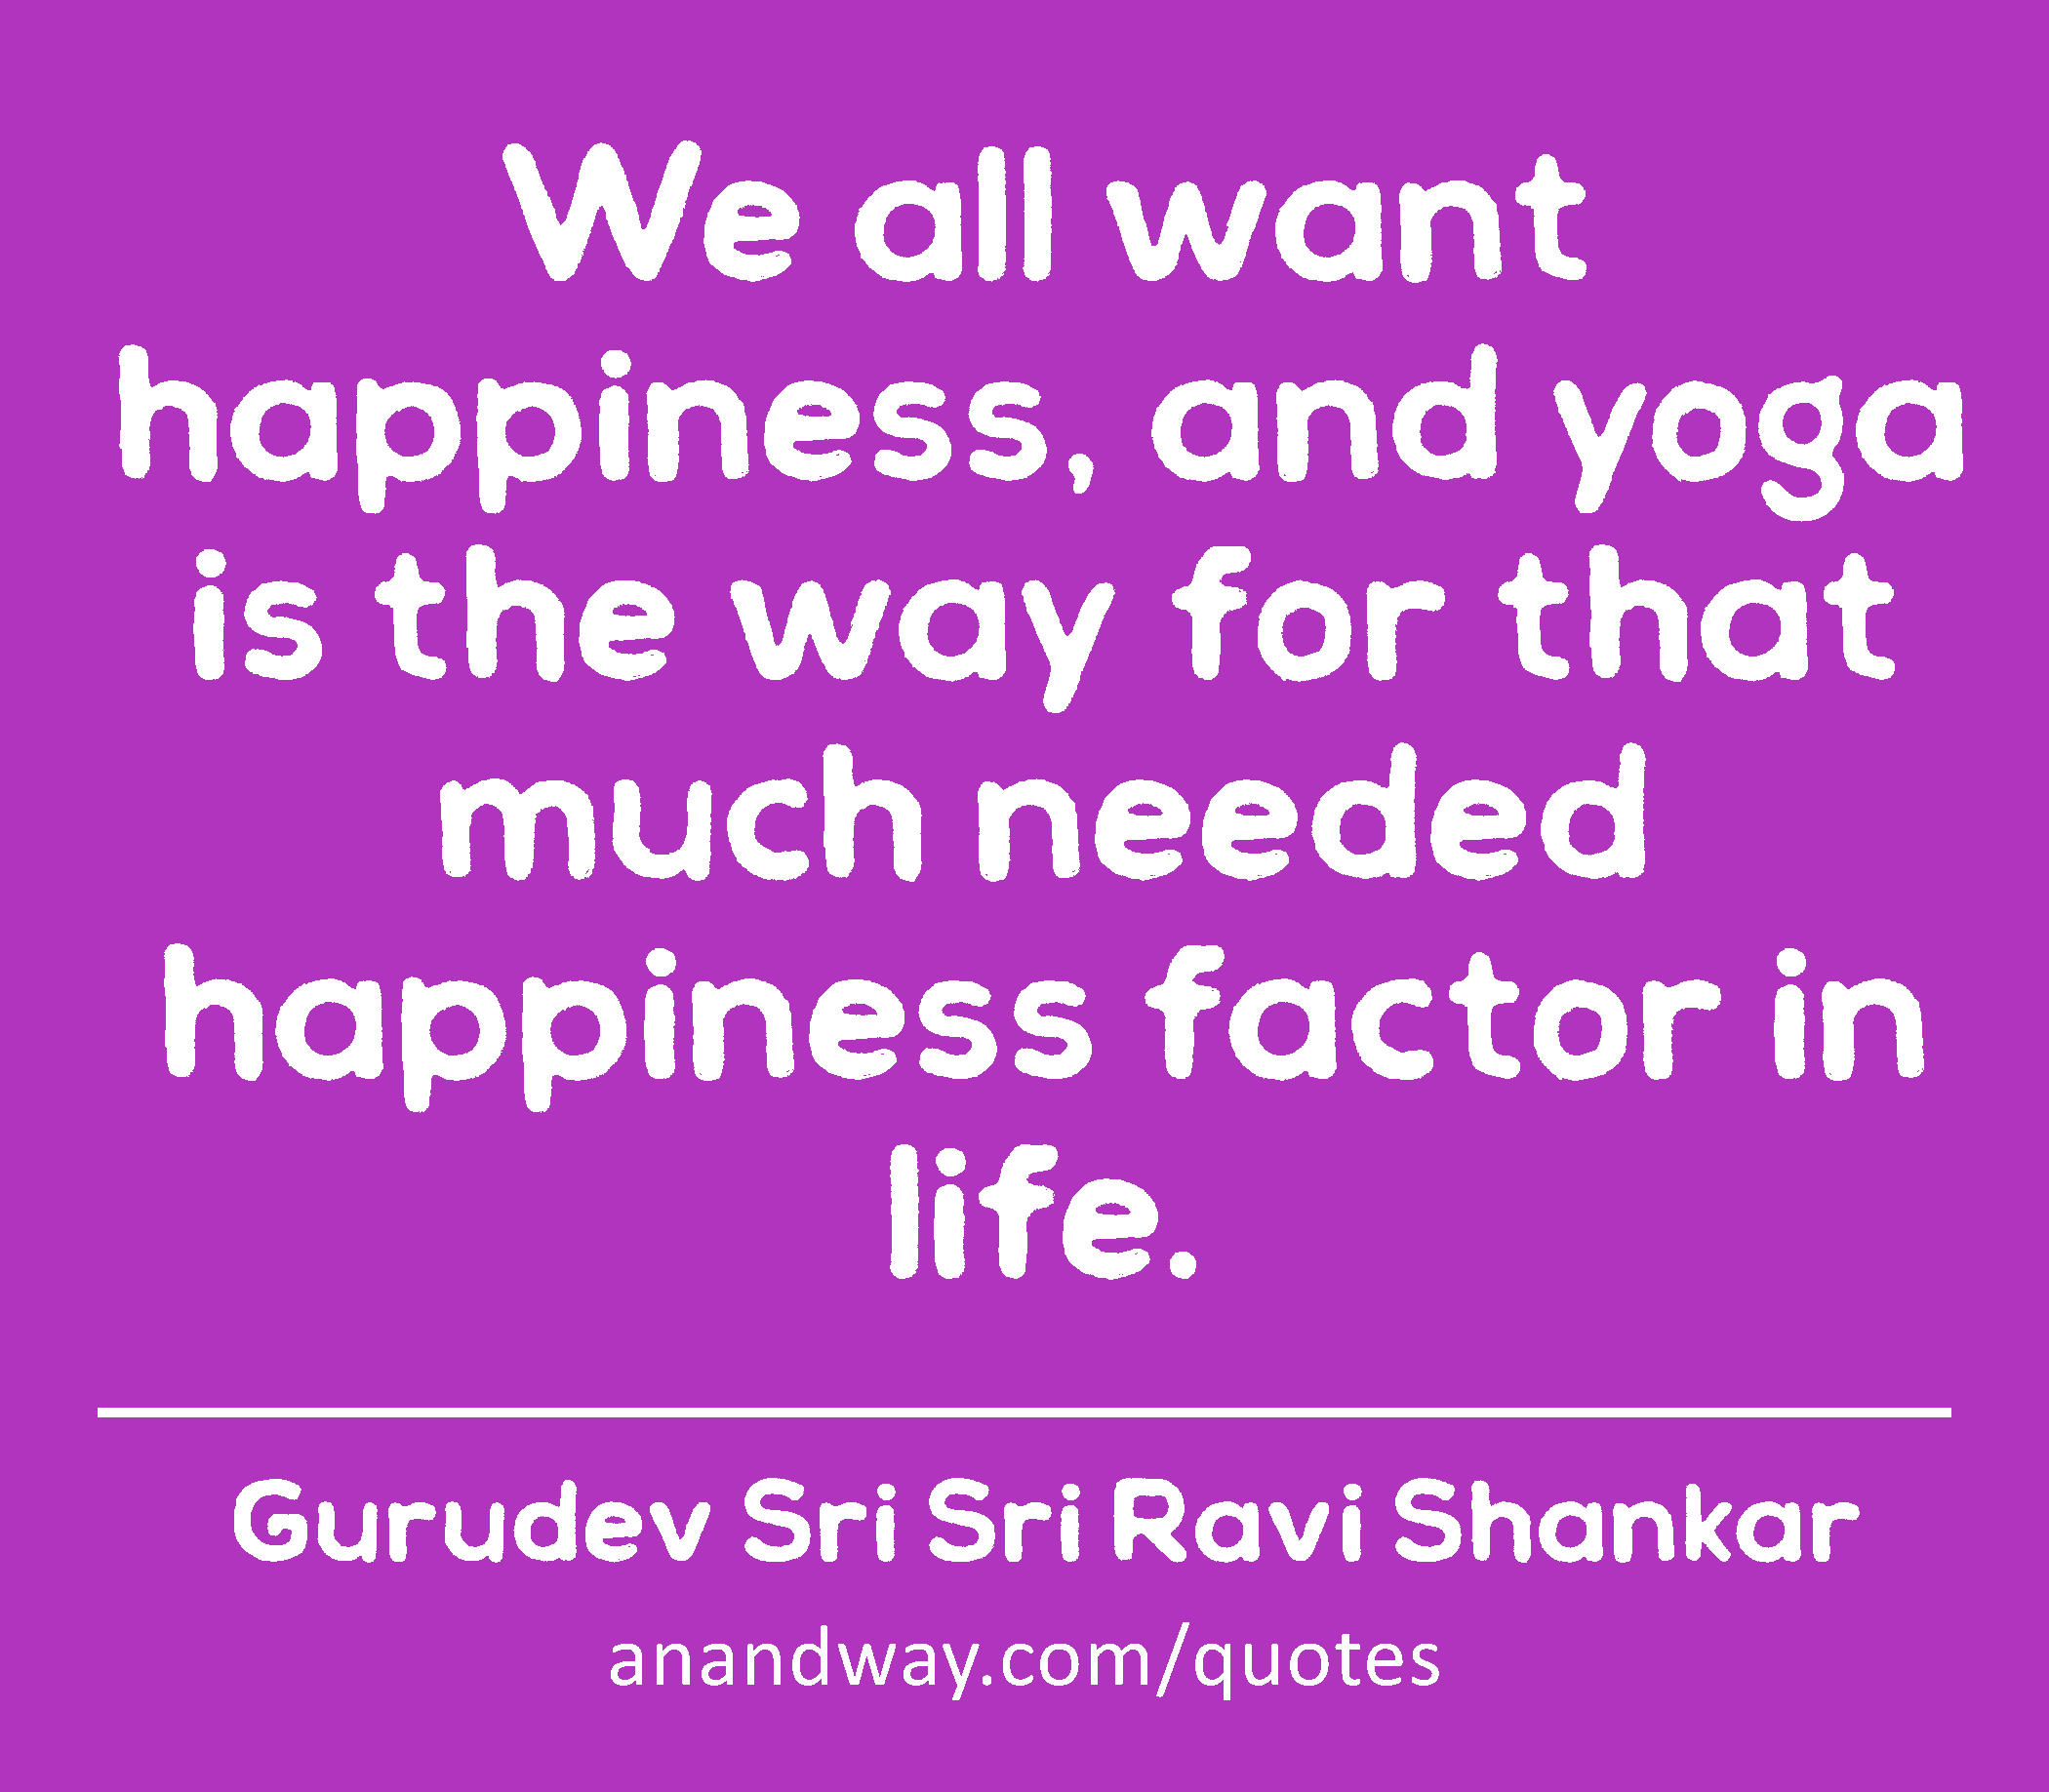 We all want happiness, and yoga is the way for that much needed happiness factor in life.
 -Gurudev Sri Sri Ravi Shankar